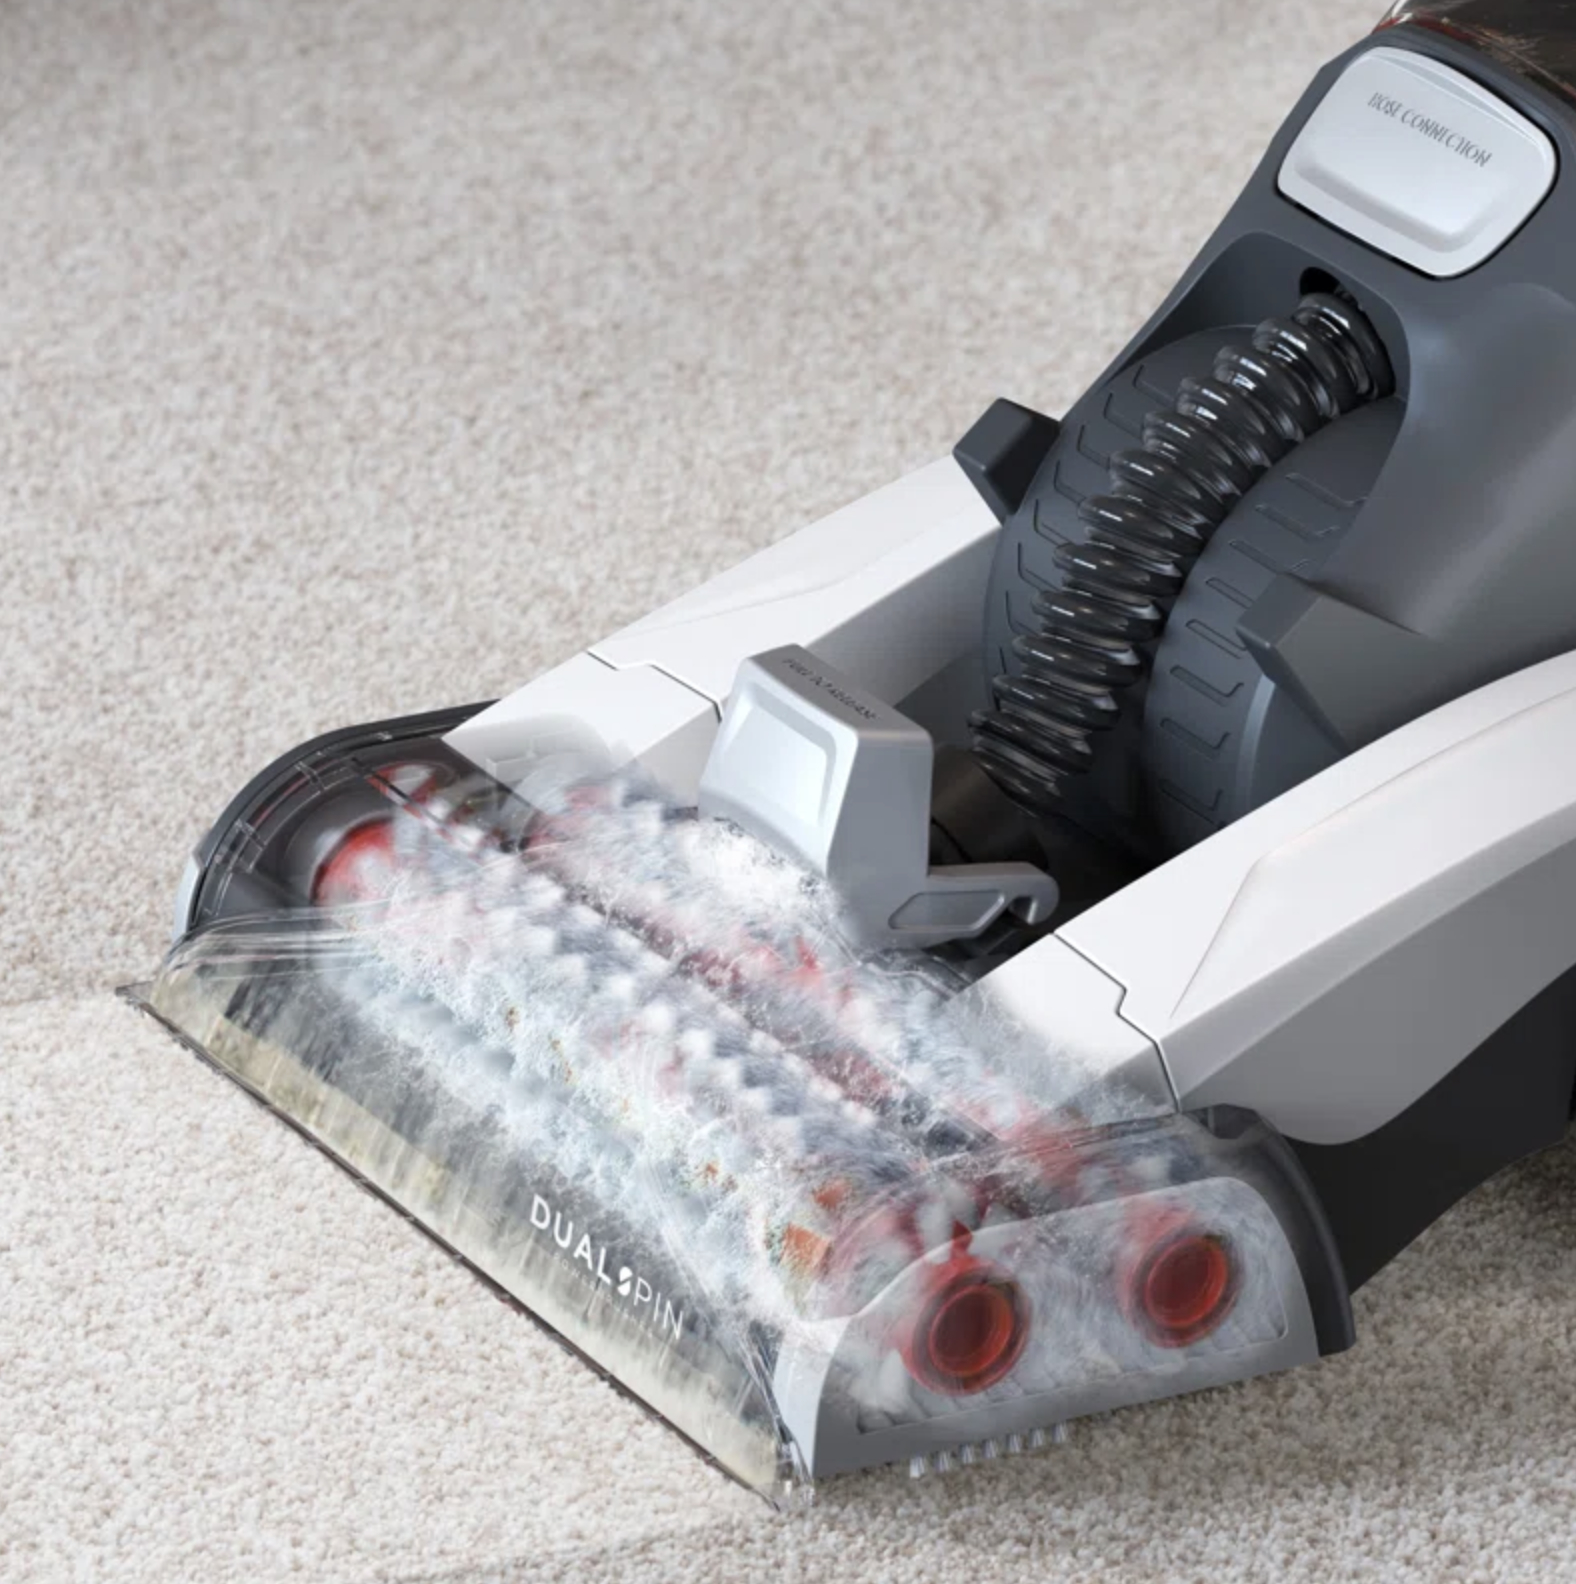 Vacuum cleaner head cleaning a carpet, showing clear suction path and debris being collected